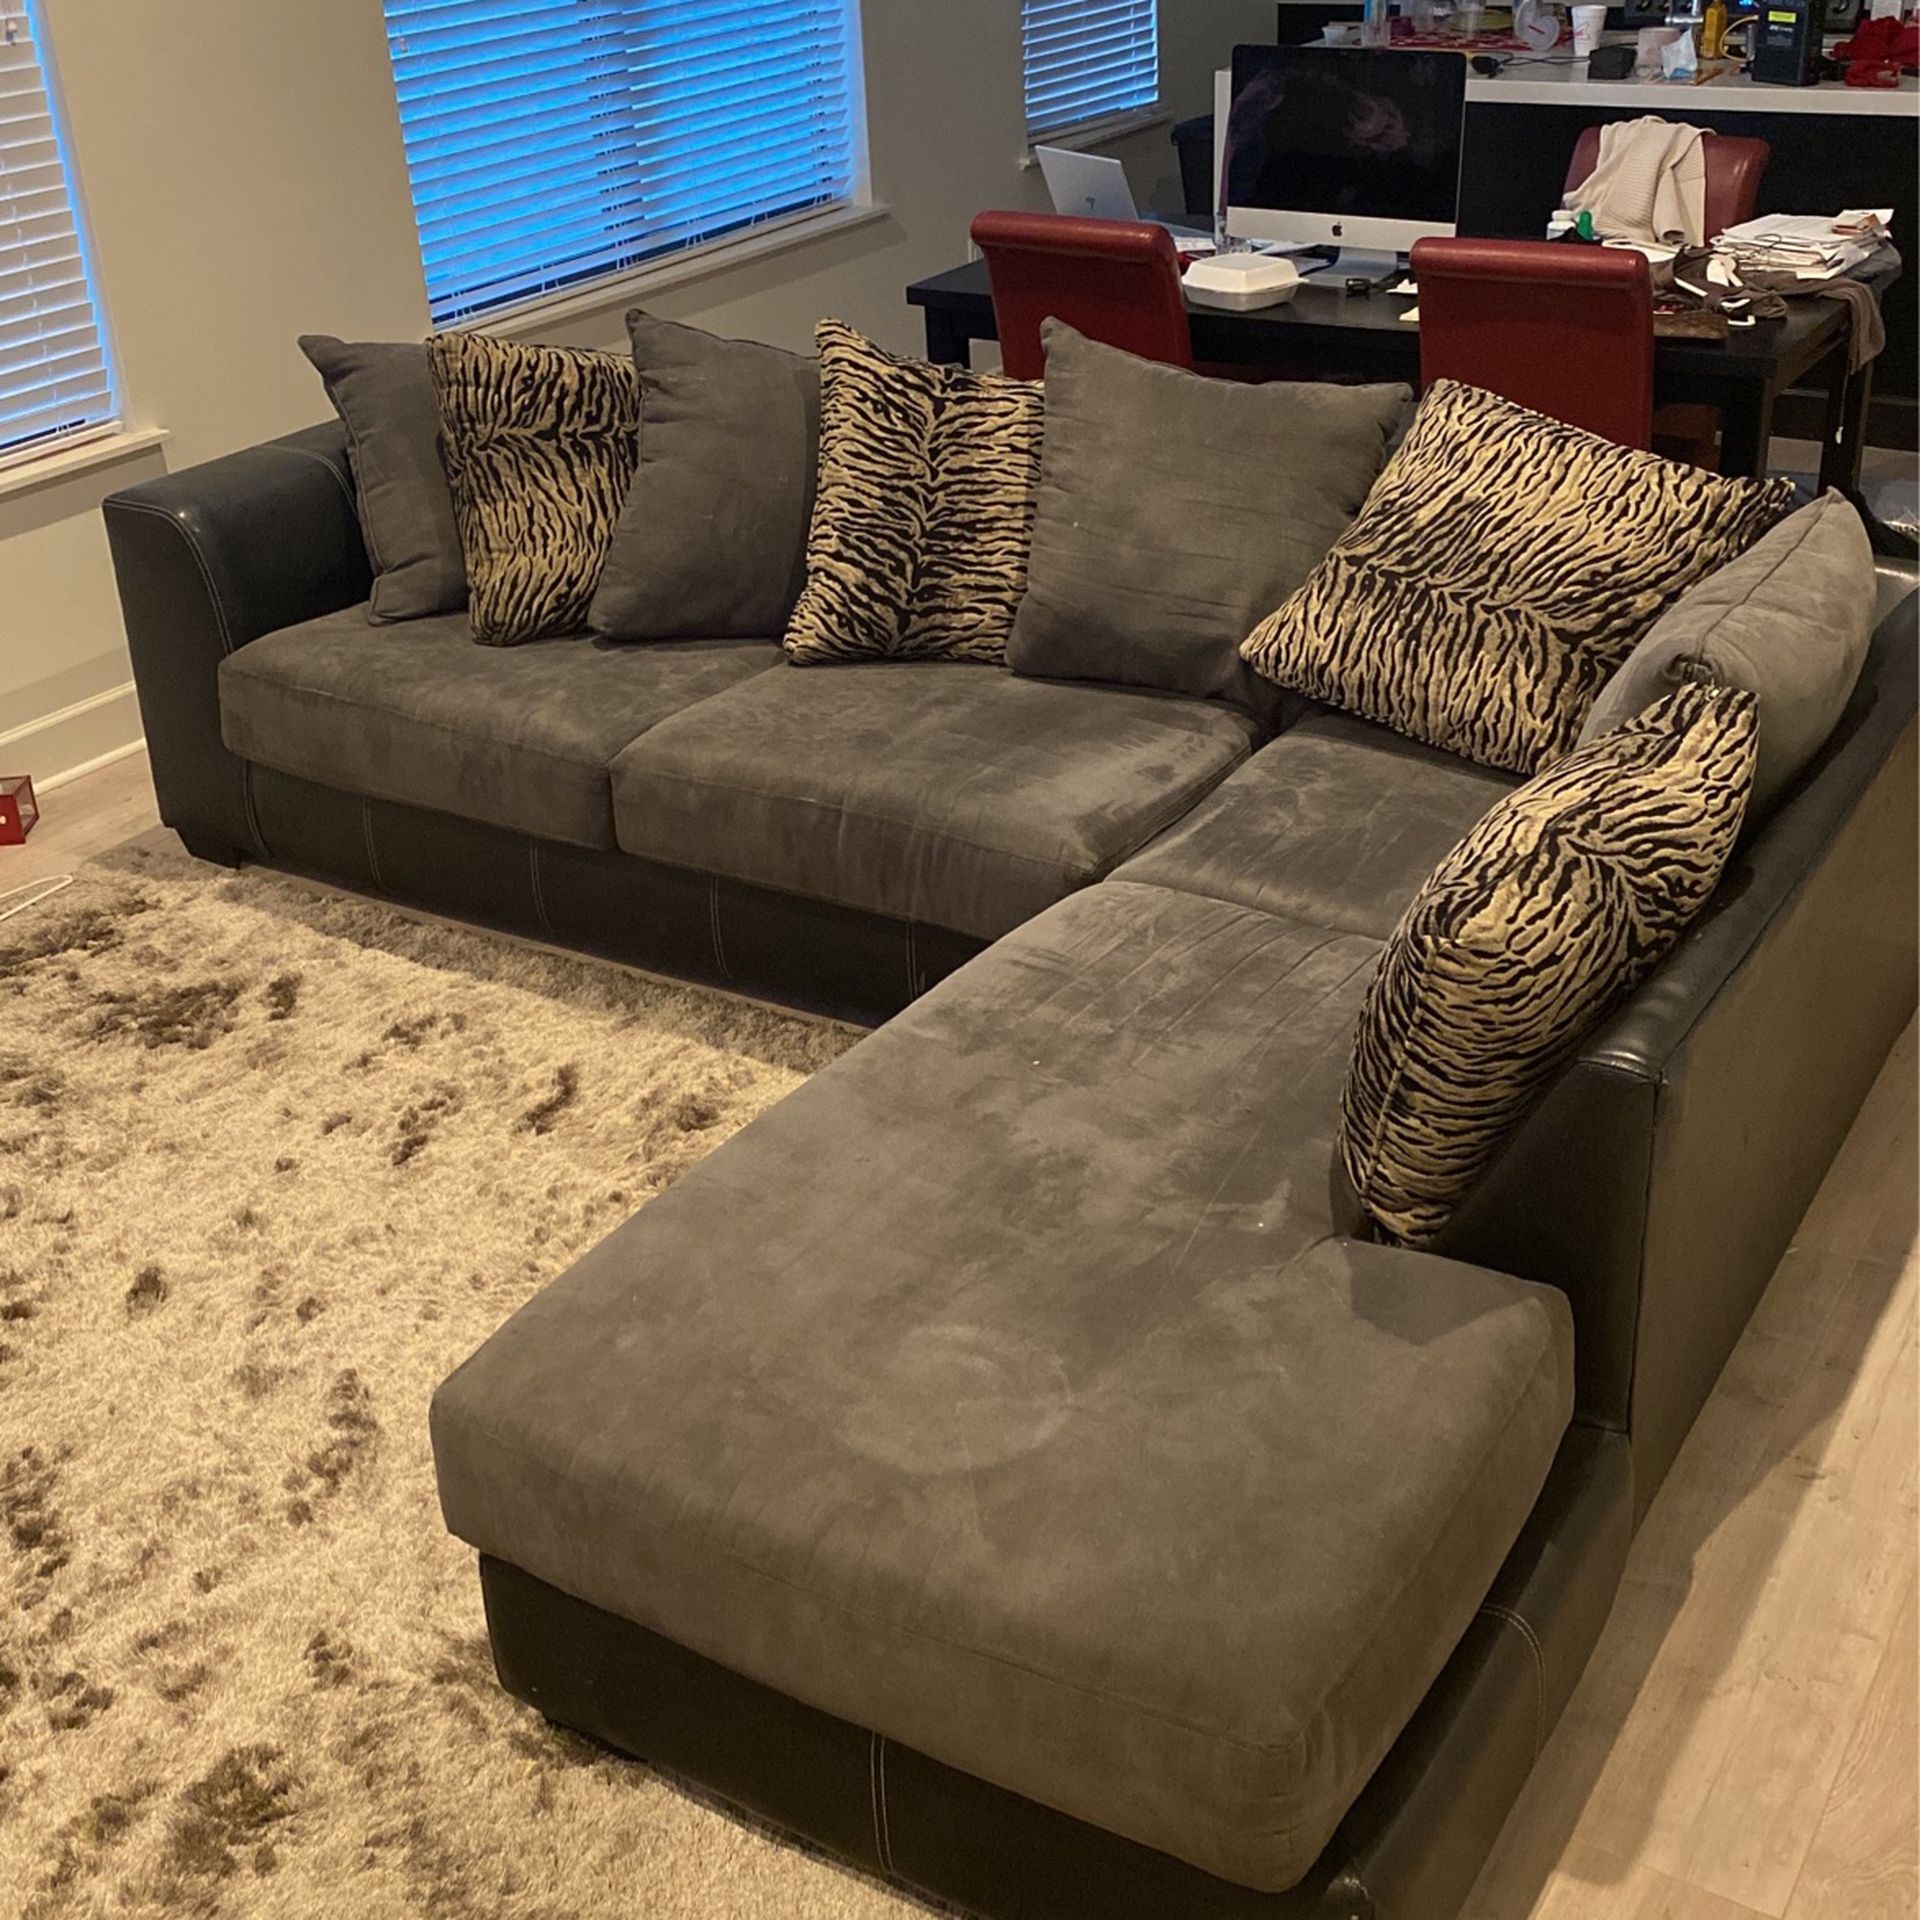 Used But Good Condition Sectional Sofa